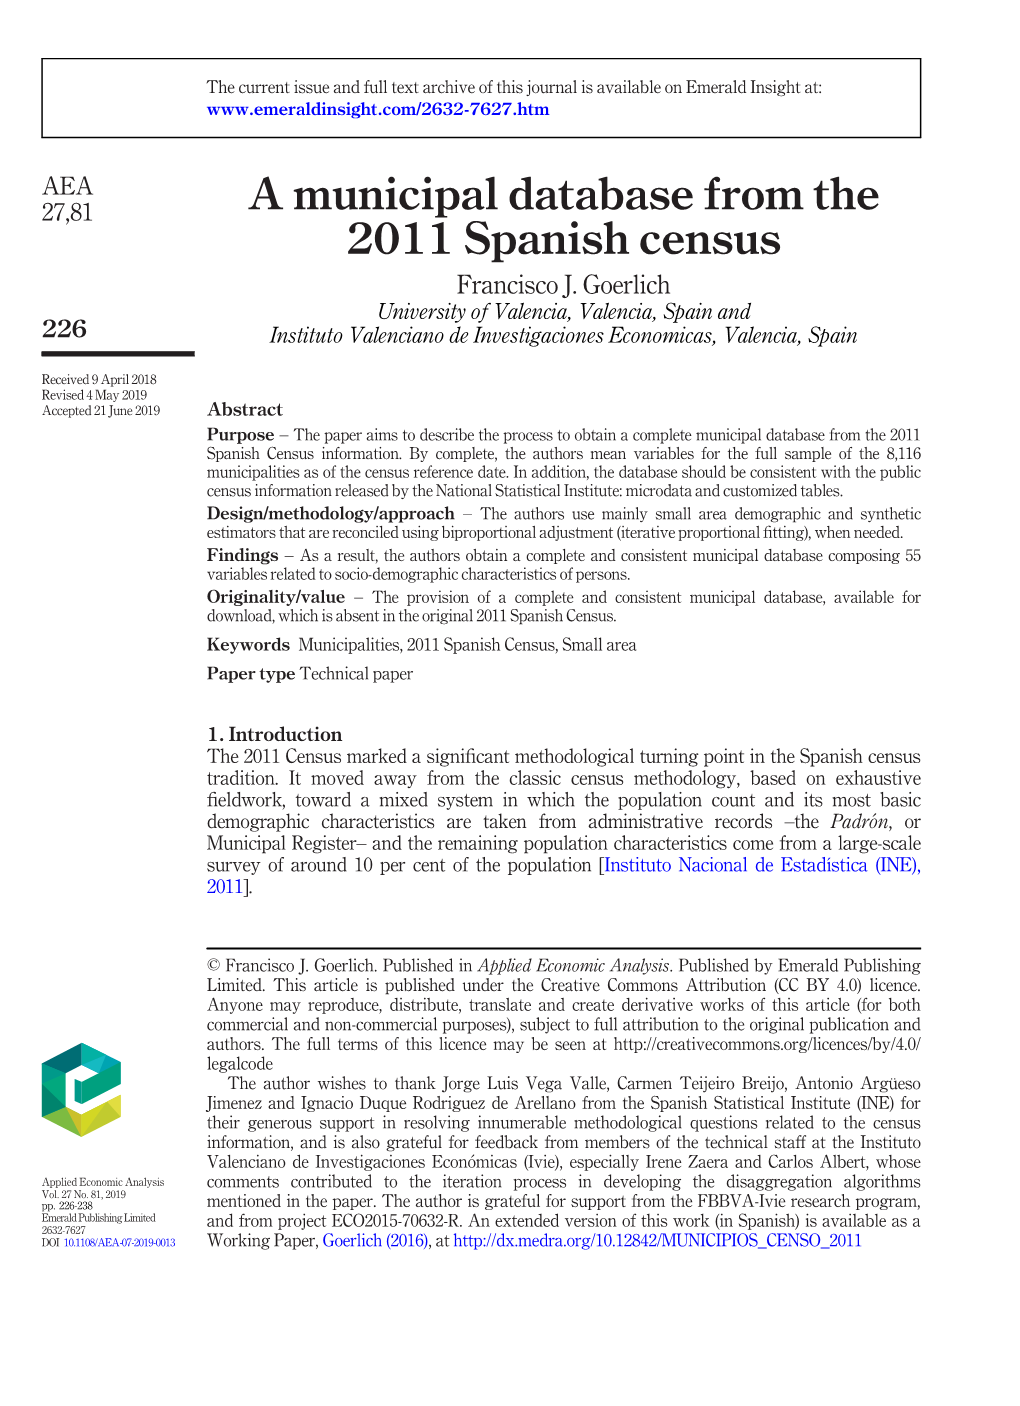 A Municipal Database from the 2011 Spanish Census Francisco J